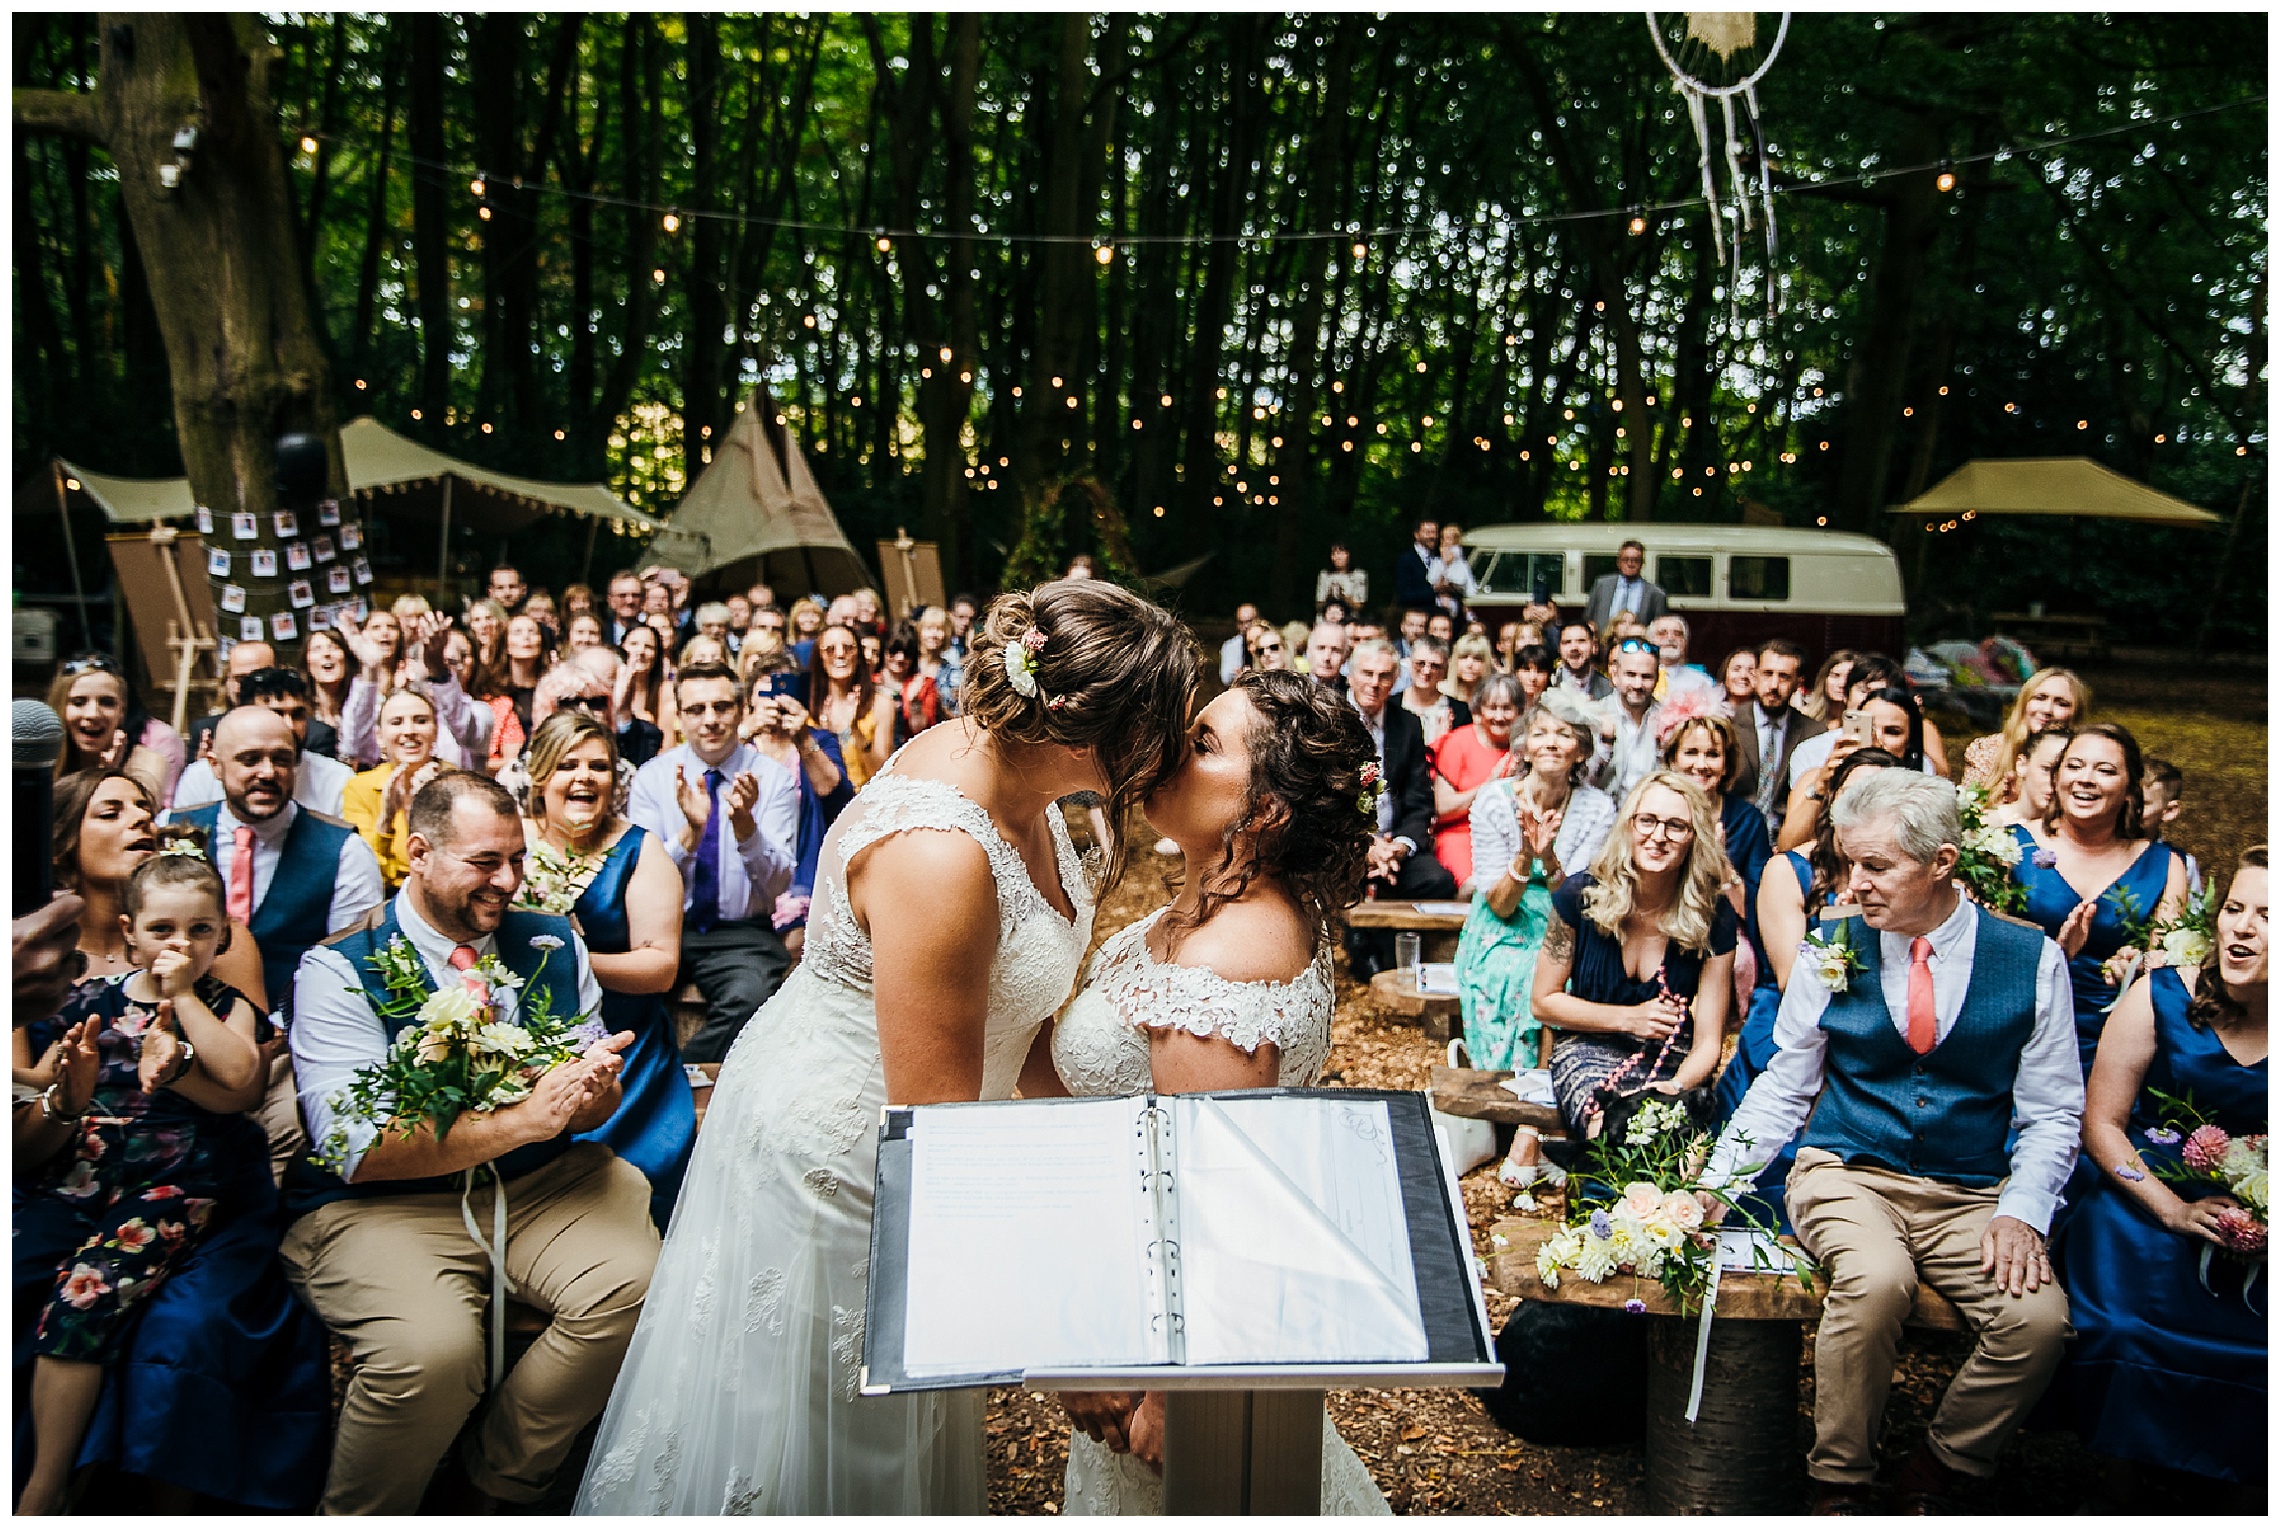 brides kiss after wedding ceremony at lilas wood